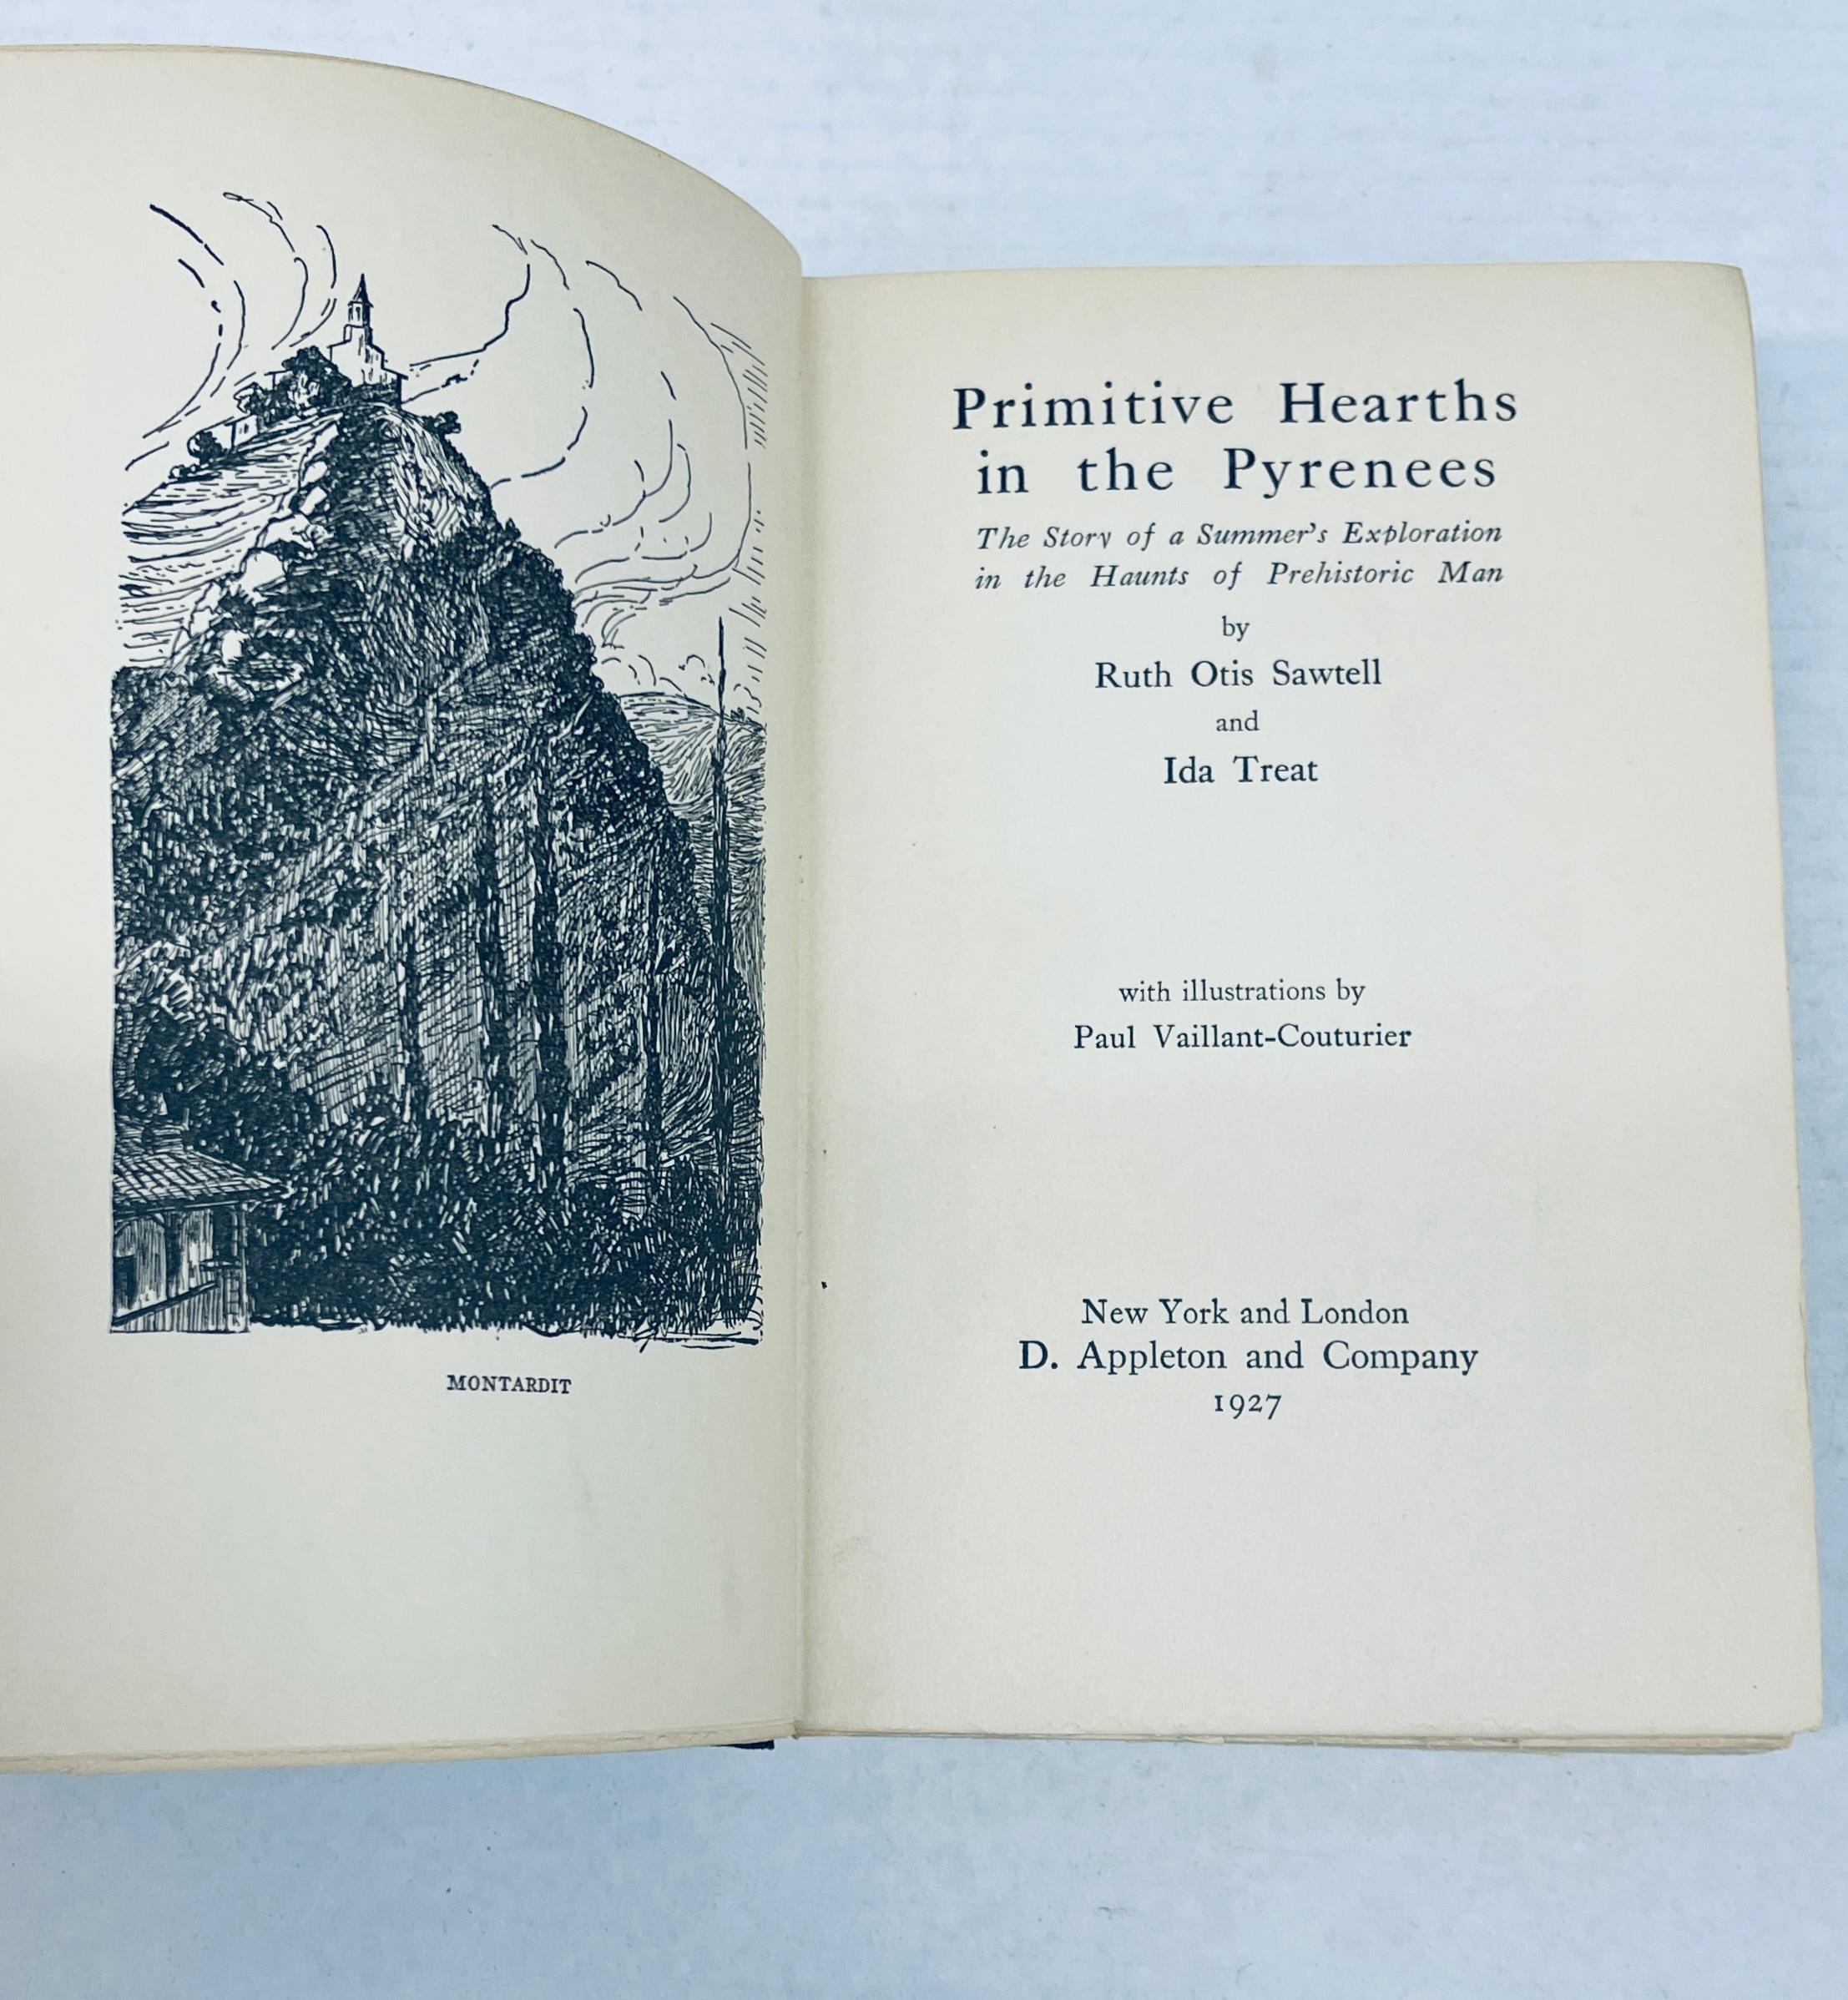 Primitive Hearths in the Pyrenees: Summer's Exporation in the Haunts of Prehistoric Man (1927)